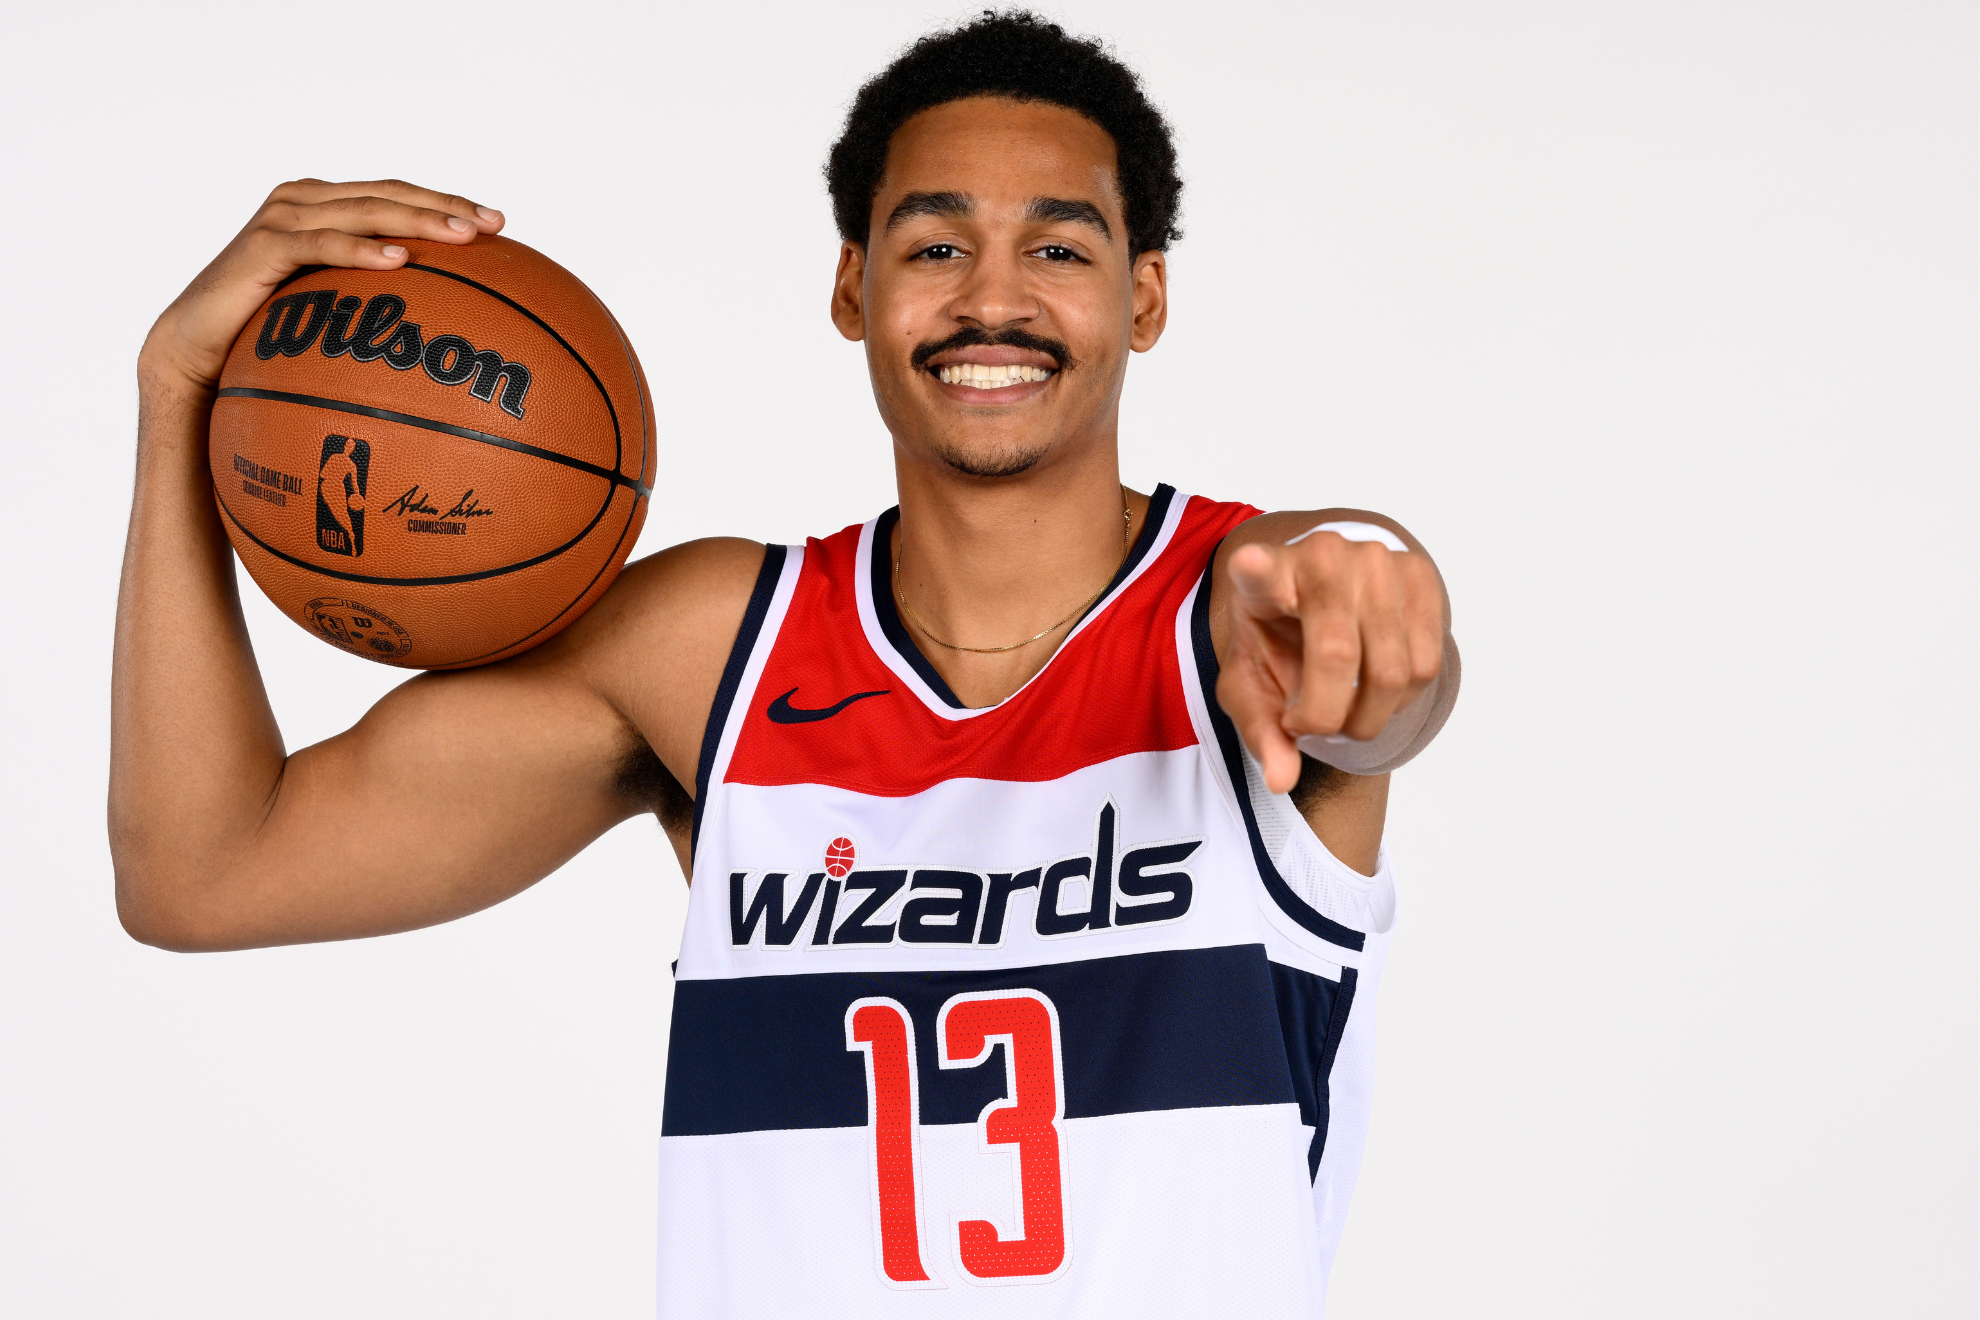 Poole poses at the Wizards media day.